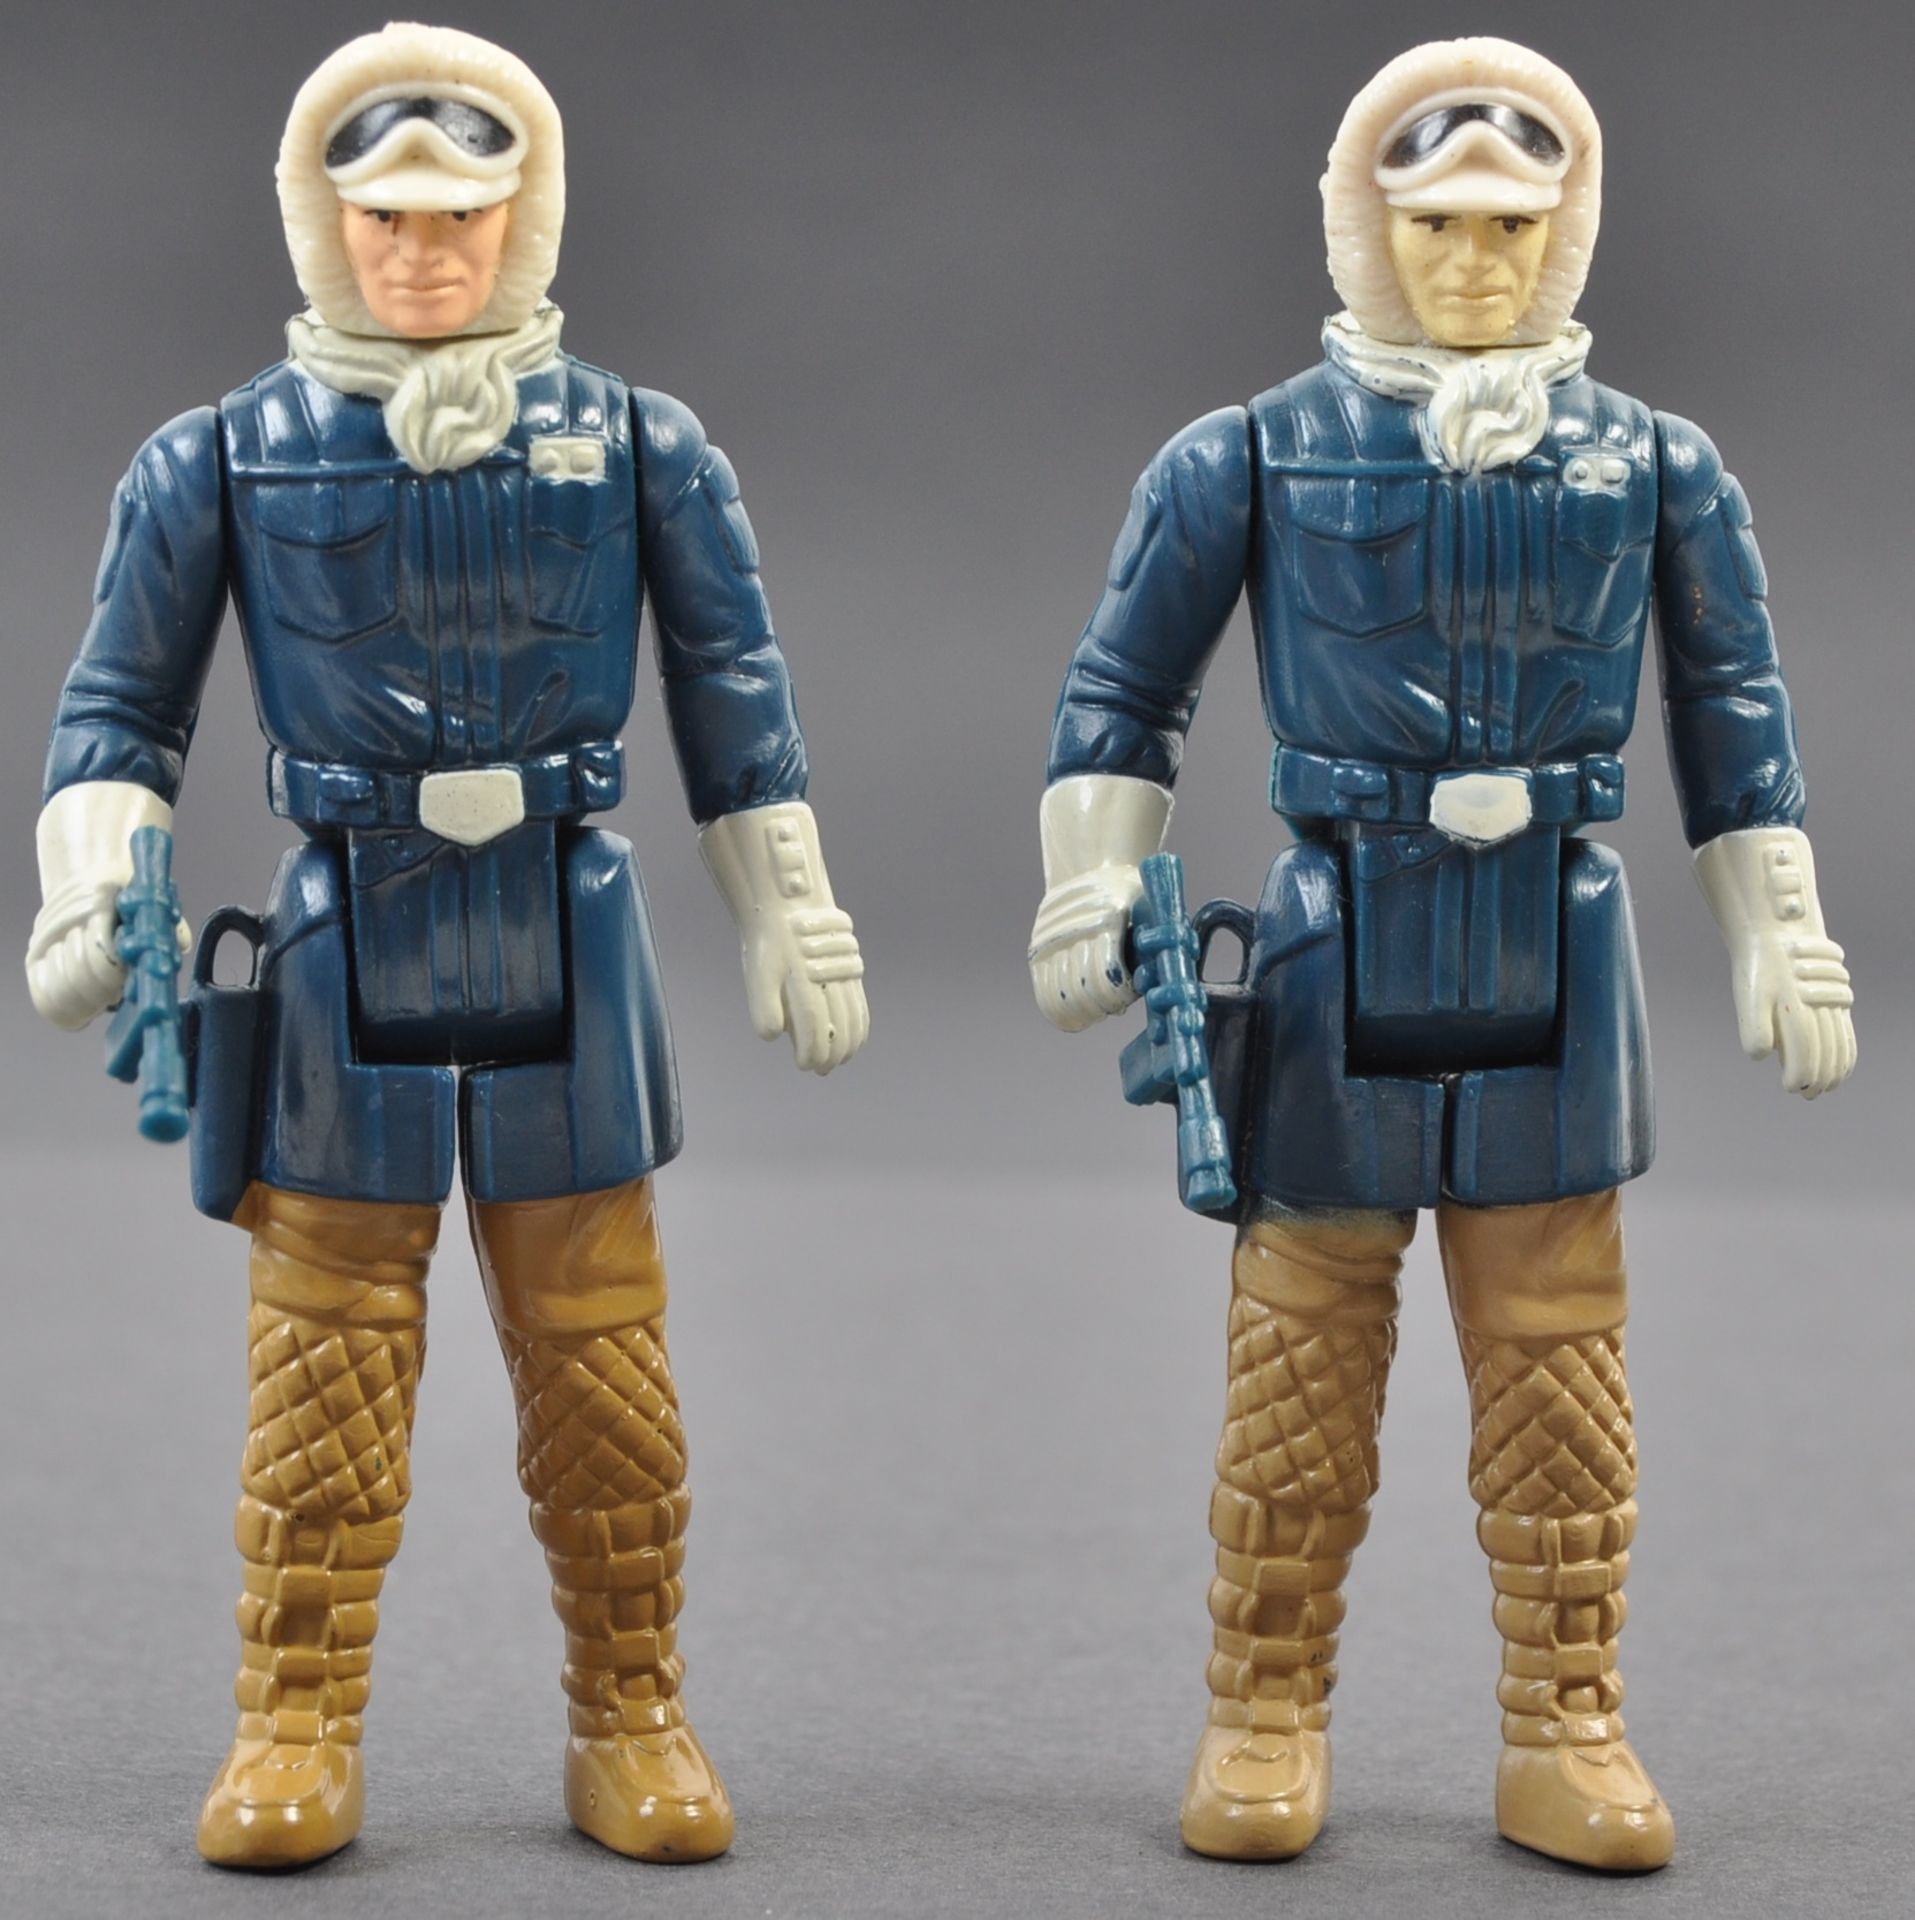 STAR WARS ACTION FIGURES - TWO VARIATION HAN SOLO HOT OUTFIT FIGURES